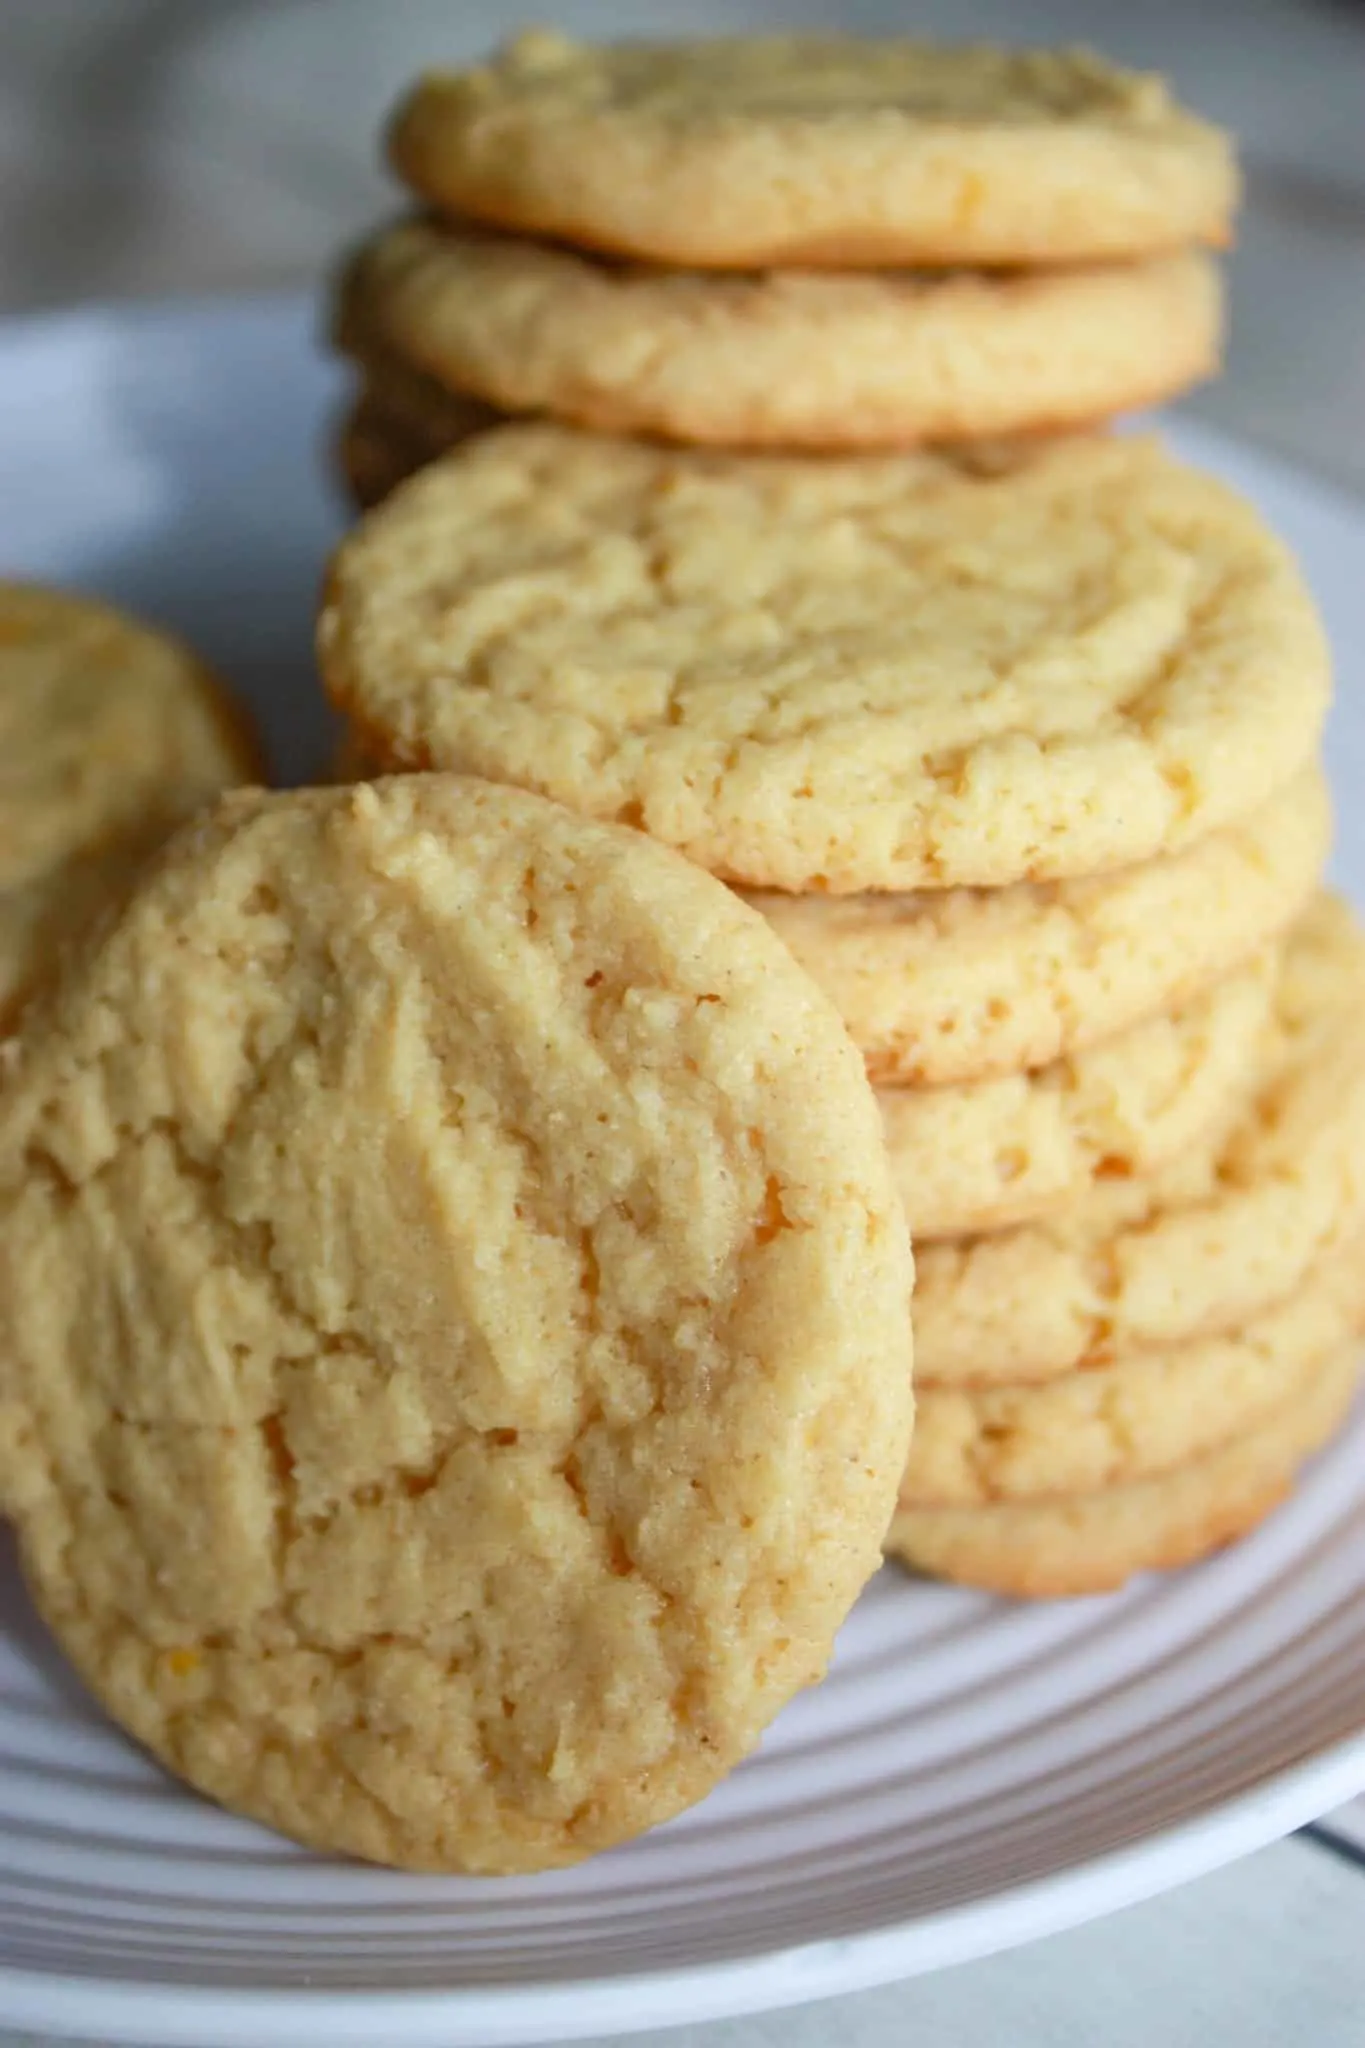 As the weather warms up I begin to crave the light taste of citrus flavours.  These Gluten Free Lemon Cookies satisfy this craving by providing a burst of lemon in every chewy bite.